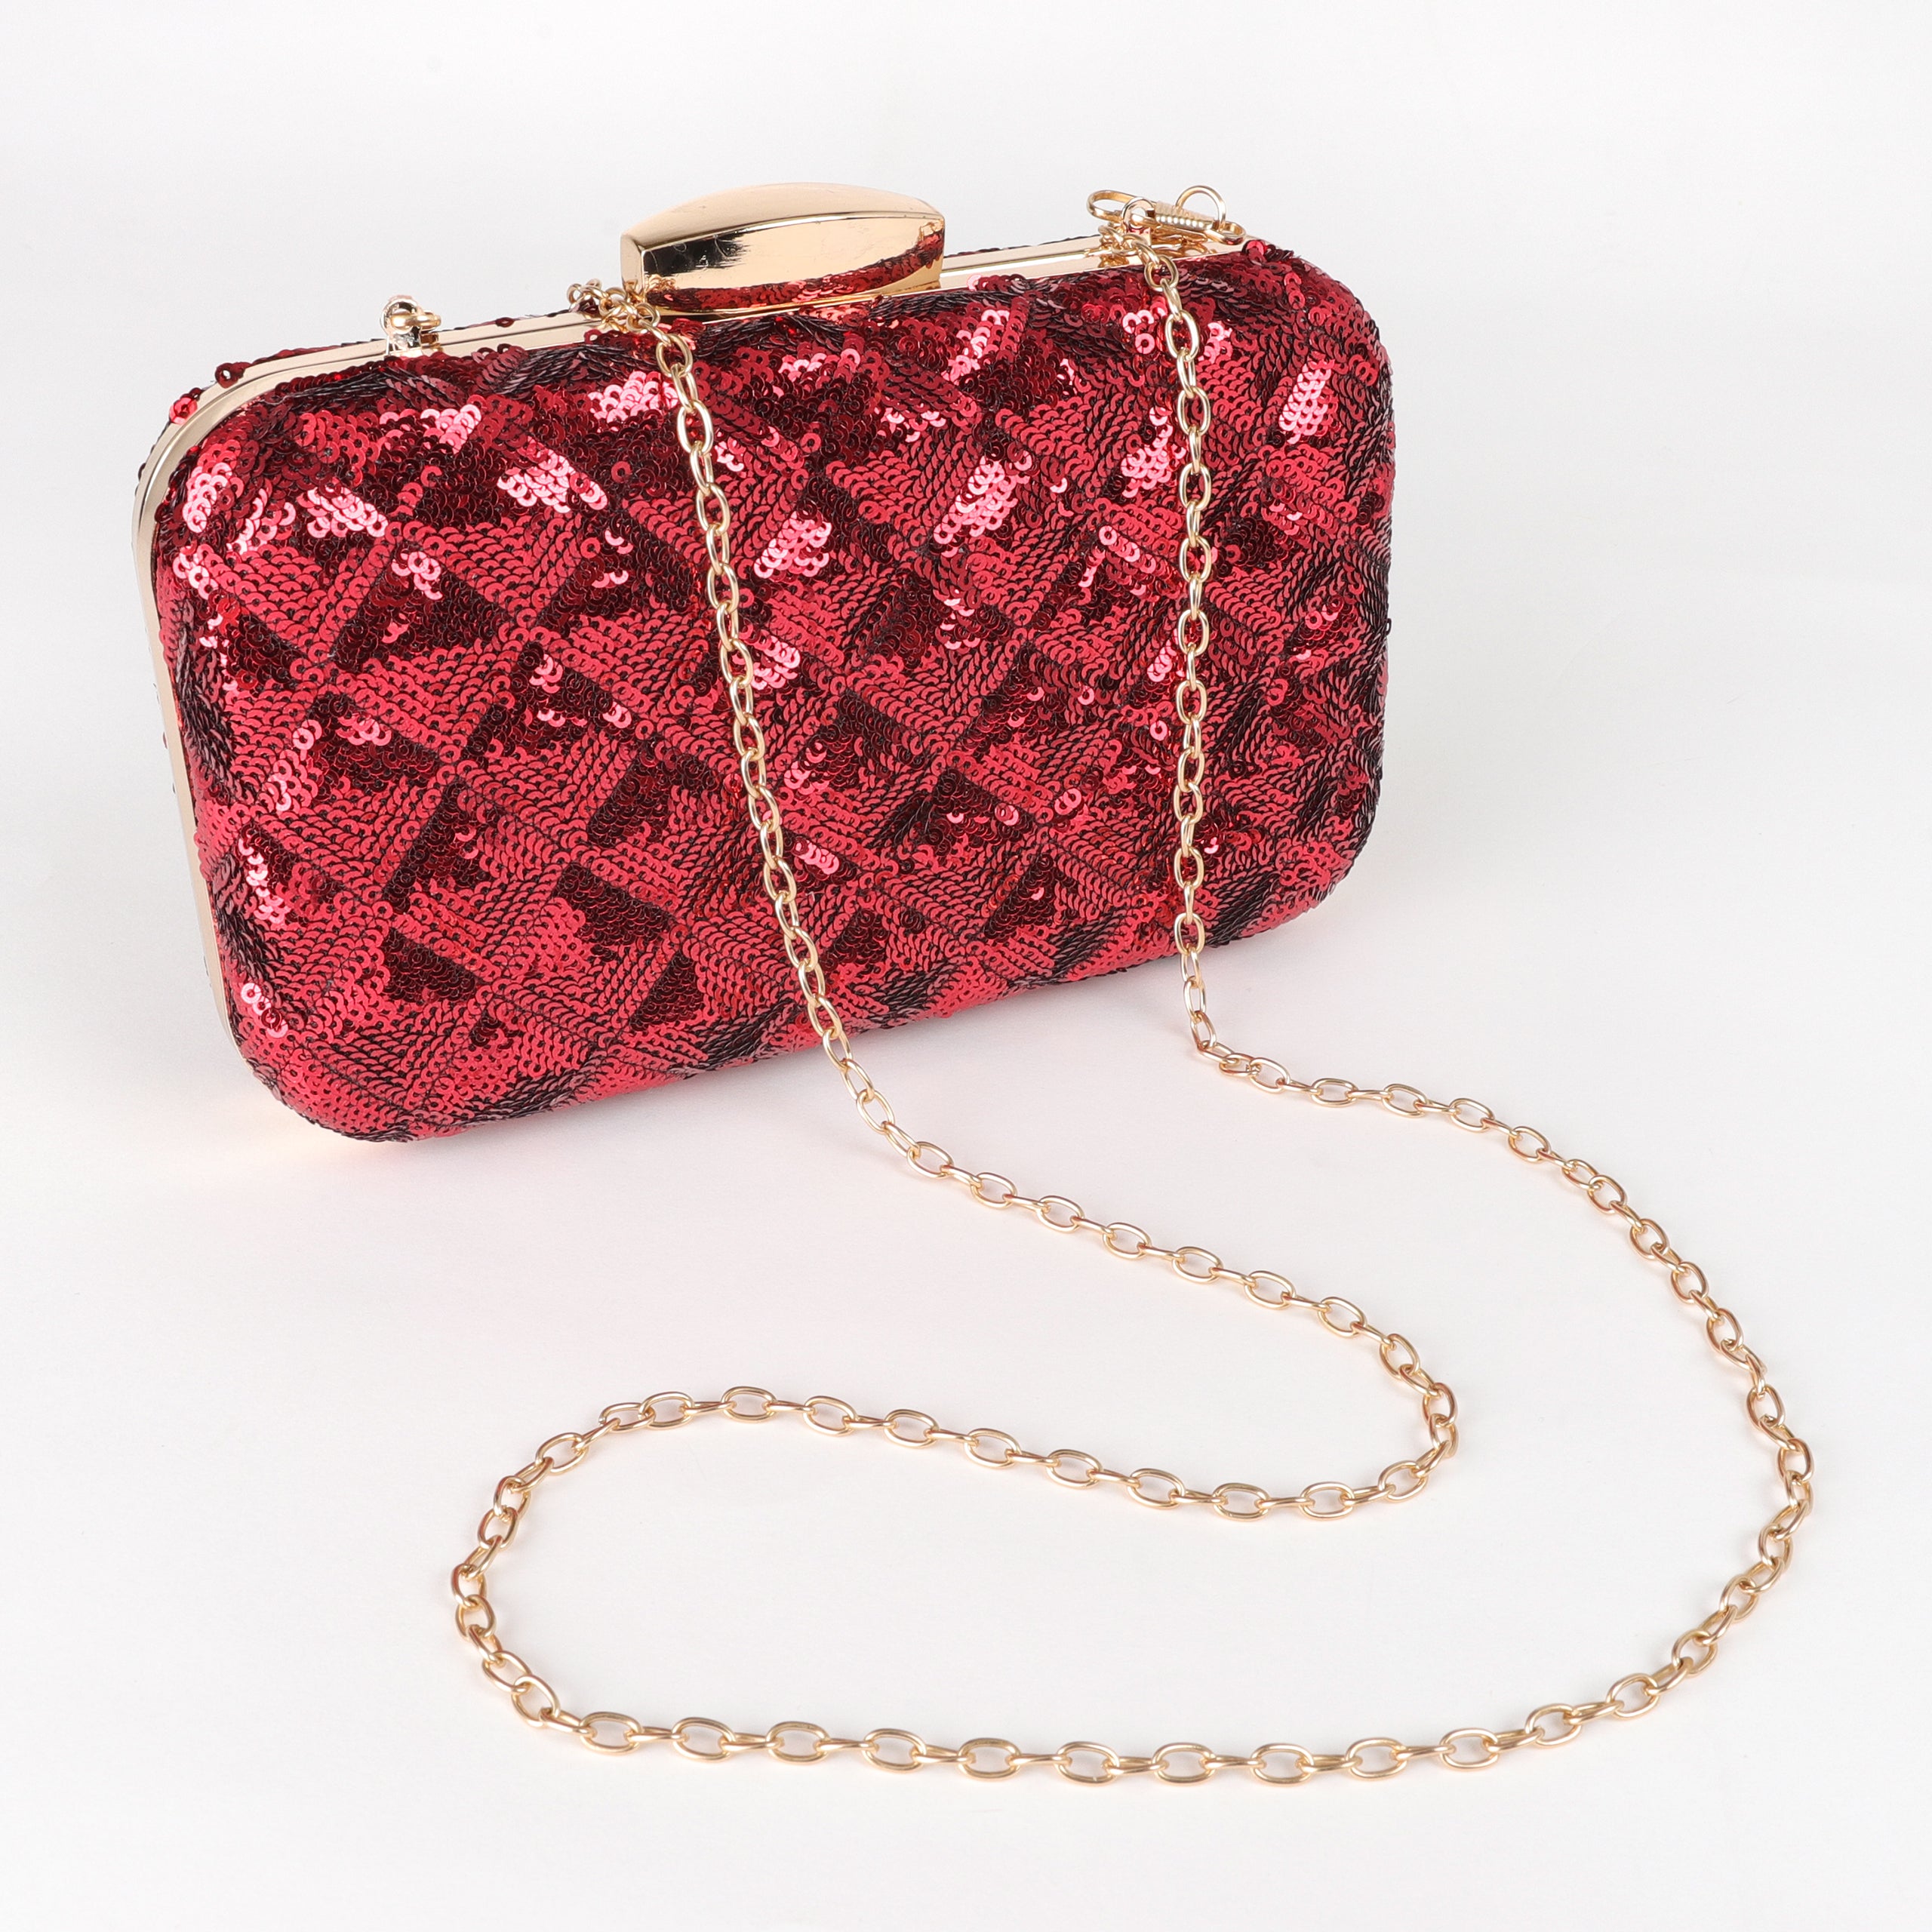 Baguette | Womens FENDI Red sequin and leather bag » Le Cheile